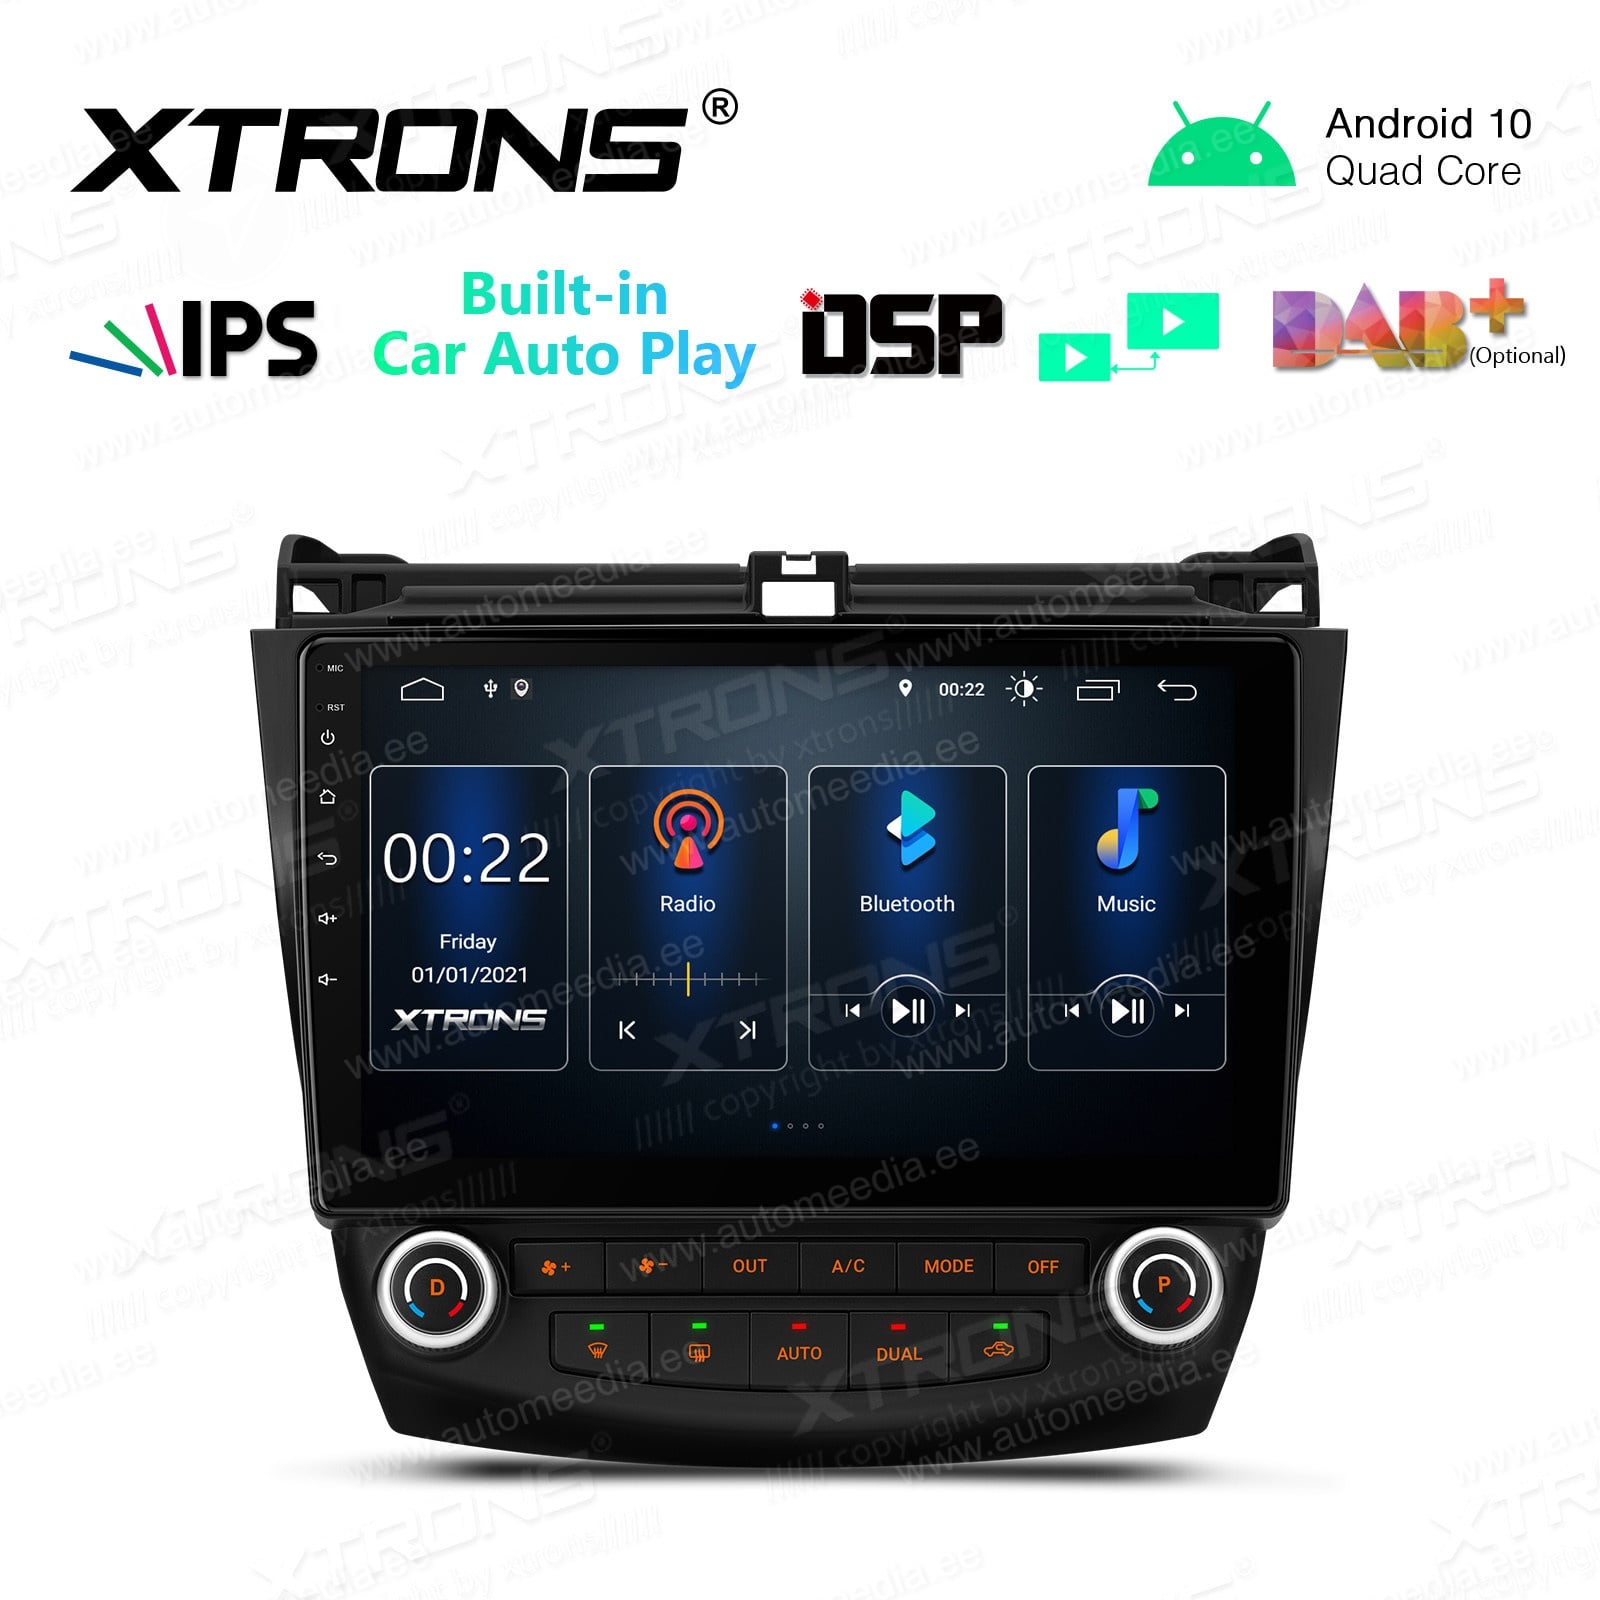 XTRONS 9 inch Touch Display Android 10.0 Quad-Core Car Stereo Radio Navigator GPS with Bluetooth 5.0 USB Port Full RCA Output Supports DVR OBD TPMS Backup Camera for Kia Sportage 